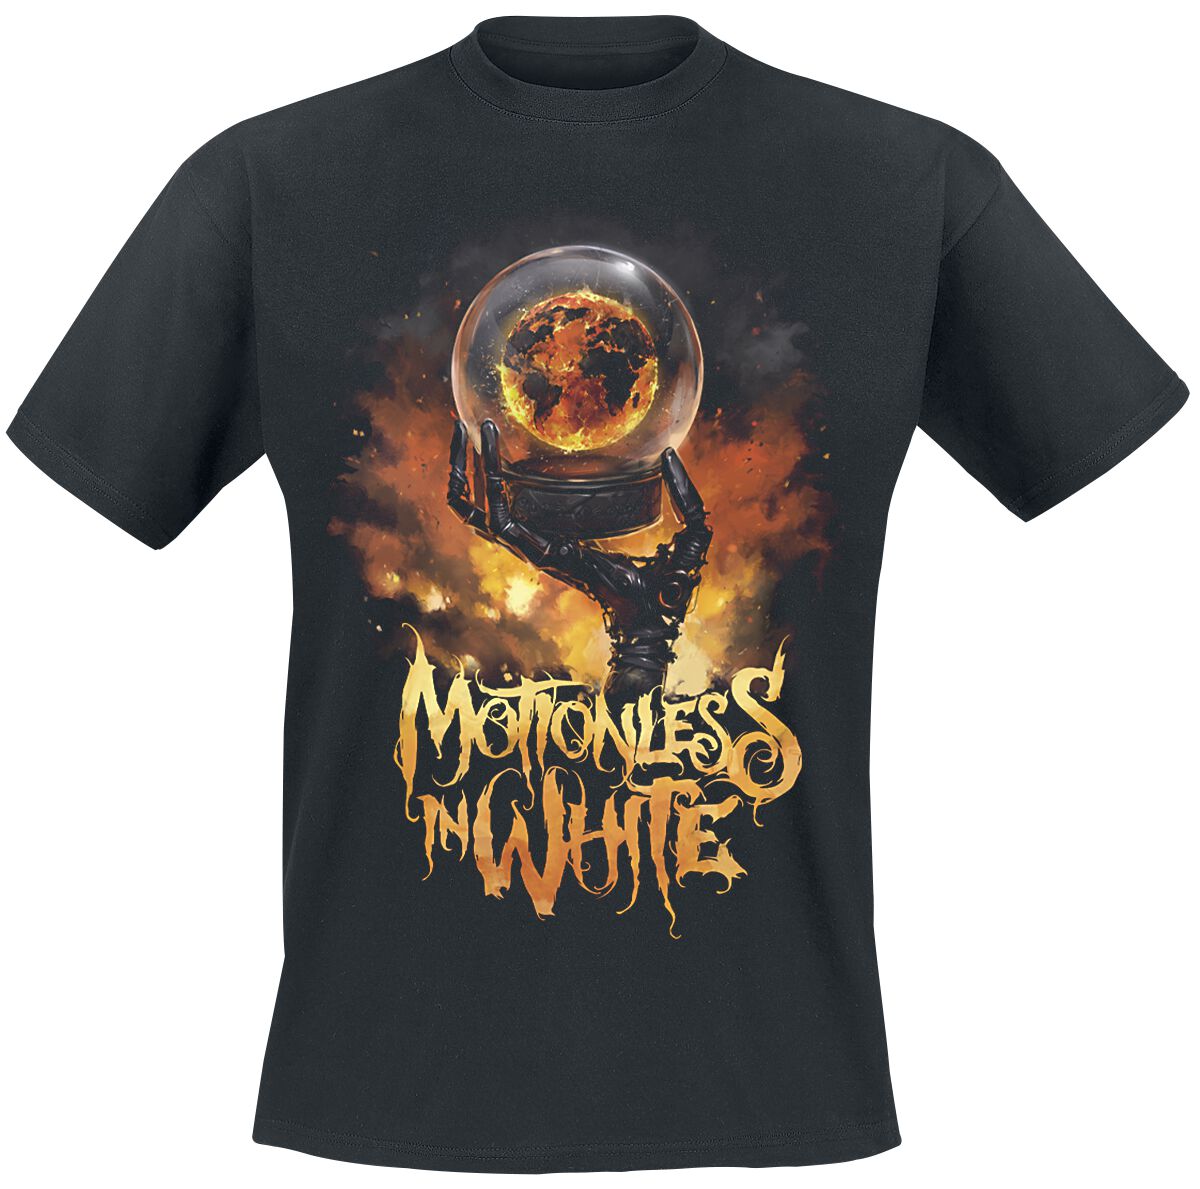 Motionless In White Scoring The End Of The World T-Shirt black